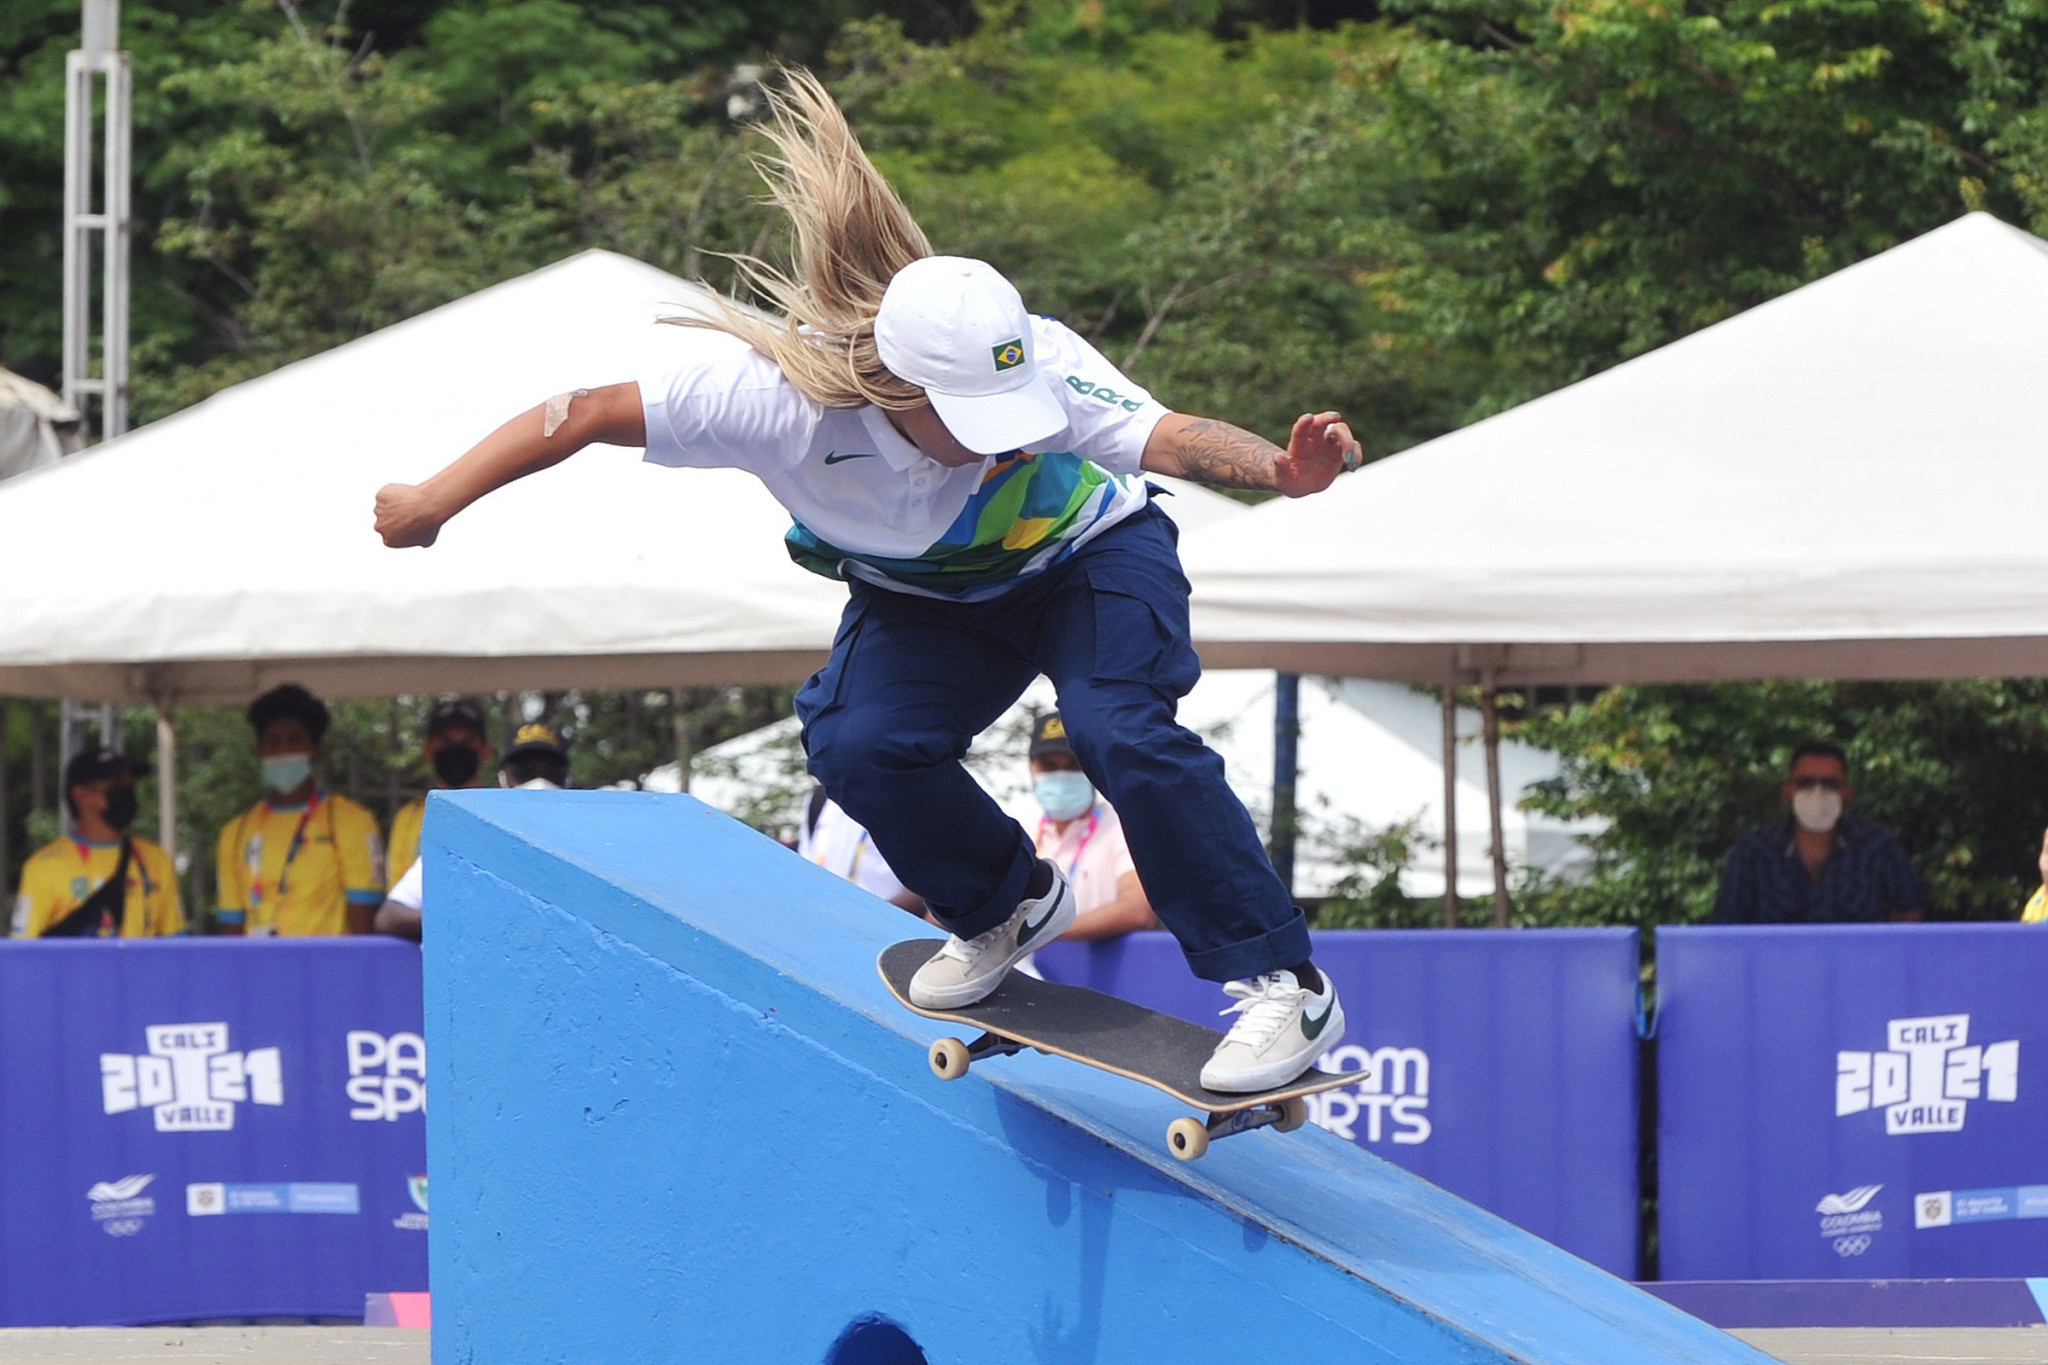 First full day of competition sees 42 medal events take place at Junior Pan American Games